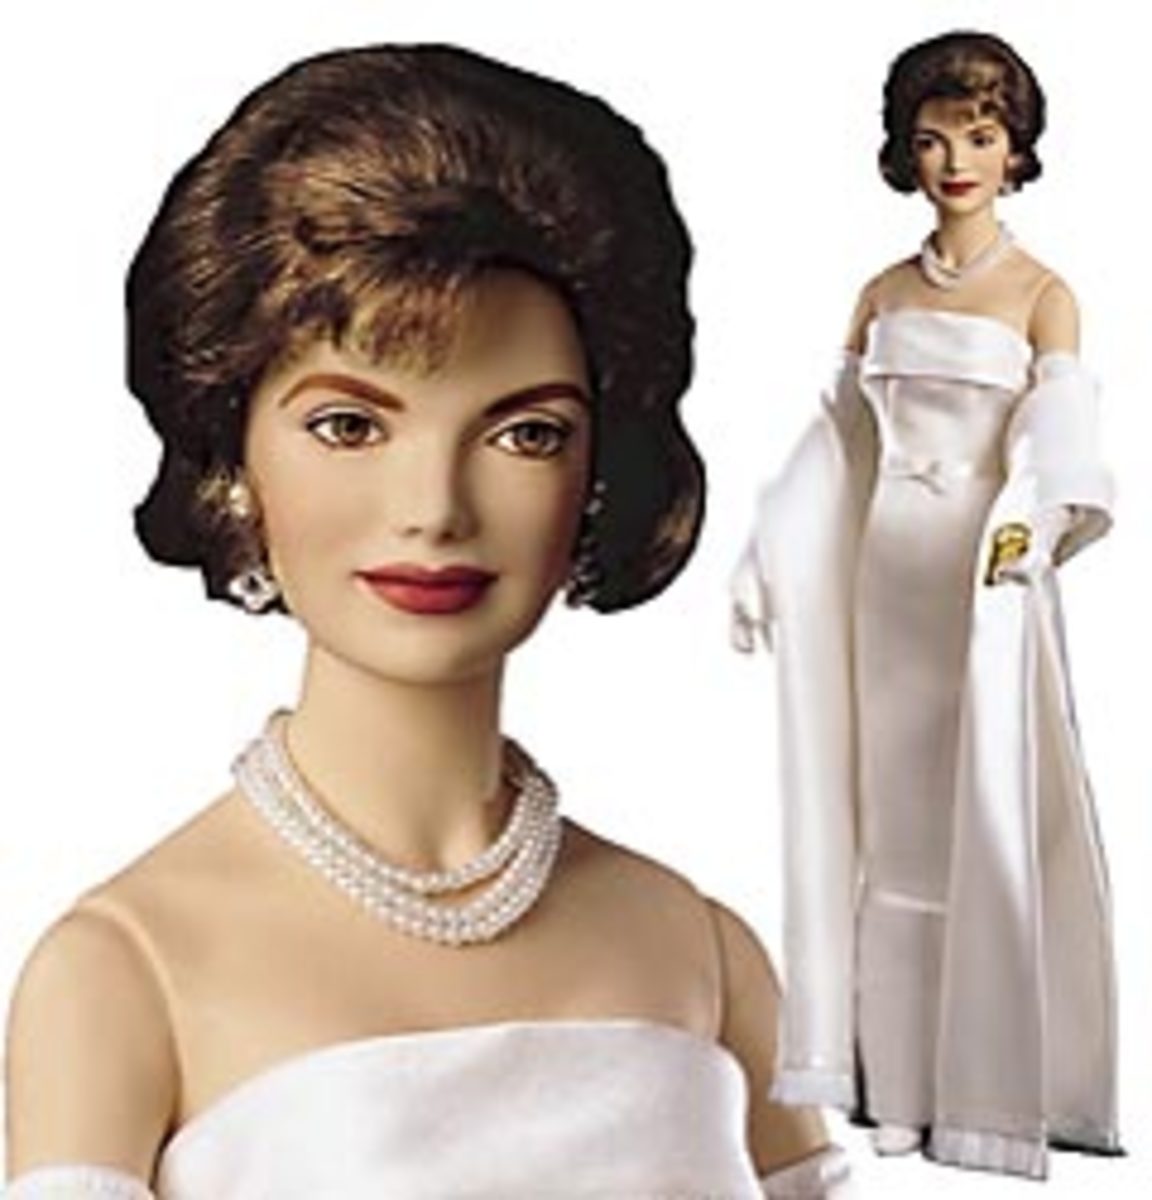 JBK - Jackie Kennedy and Her Fashion Style Impact Upon the United ...